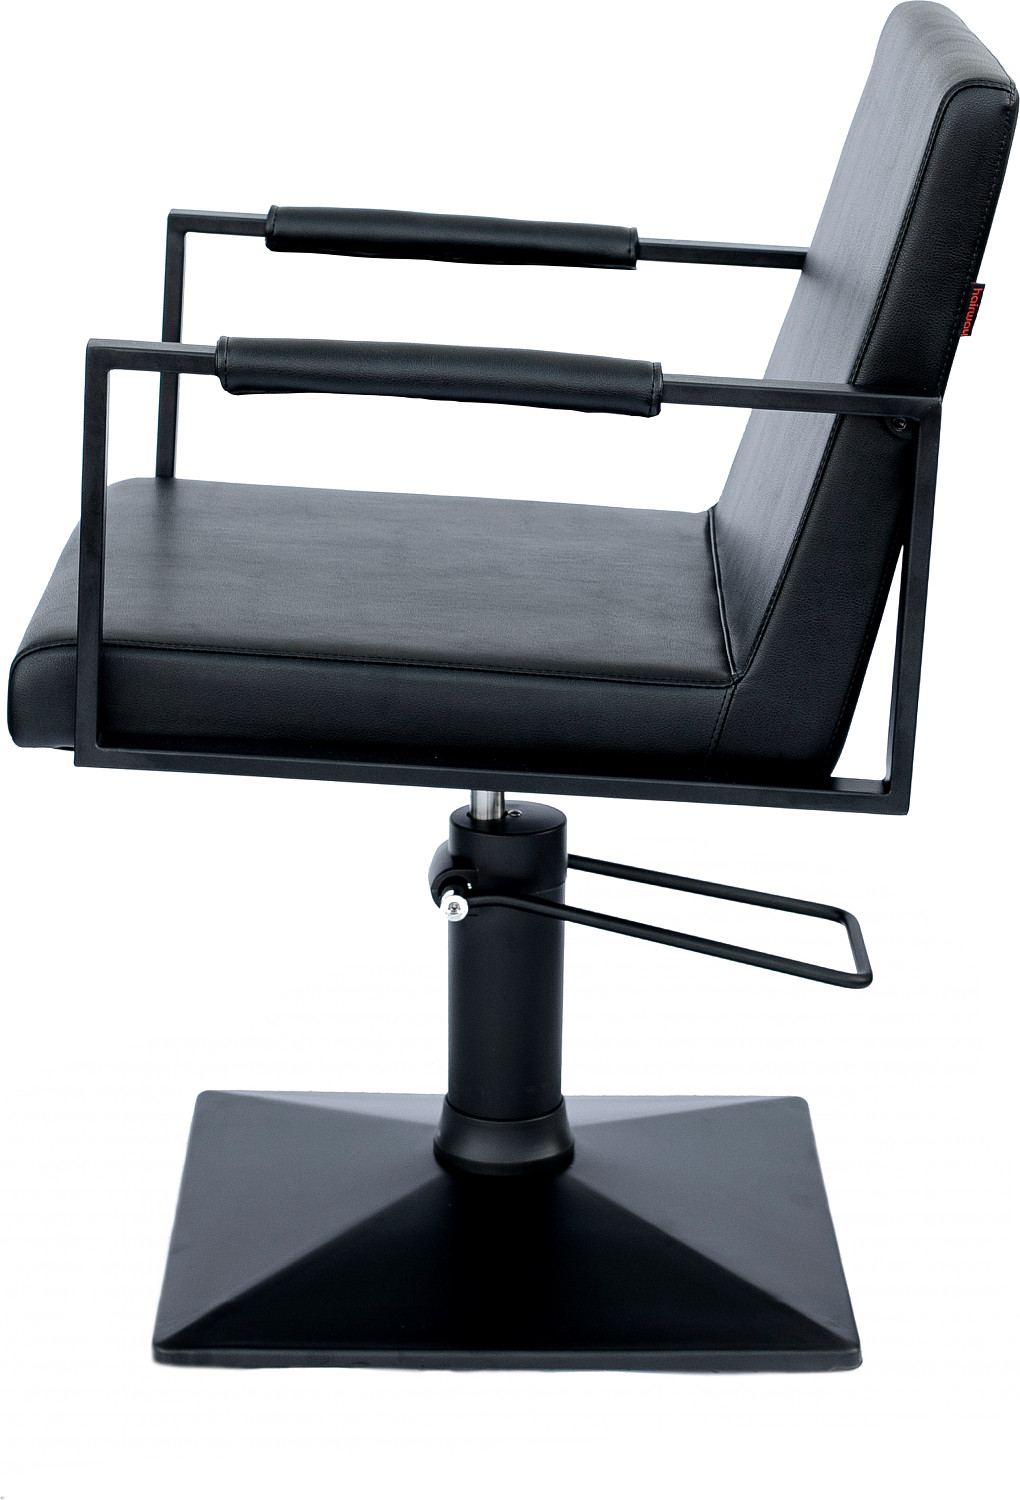  Hairway Styling Chair "John" black with square base 